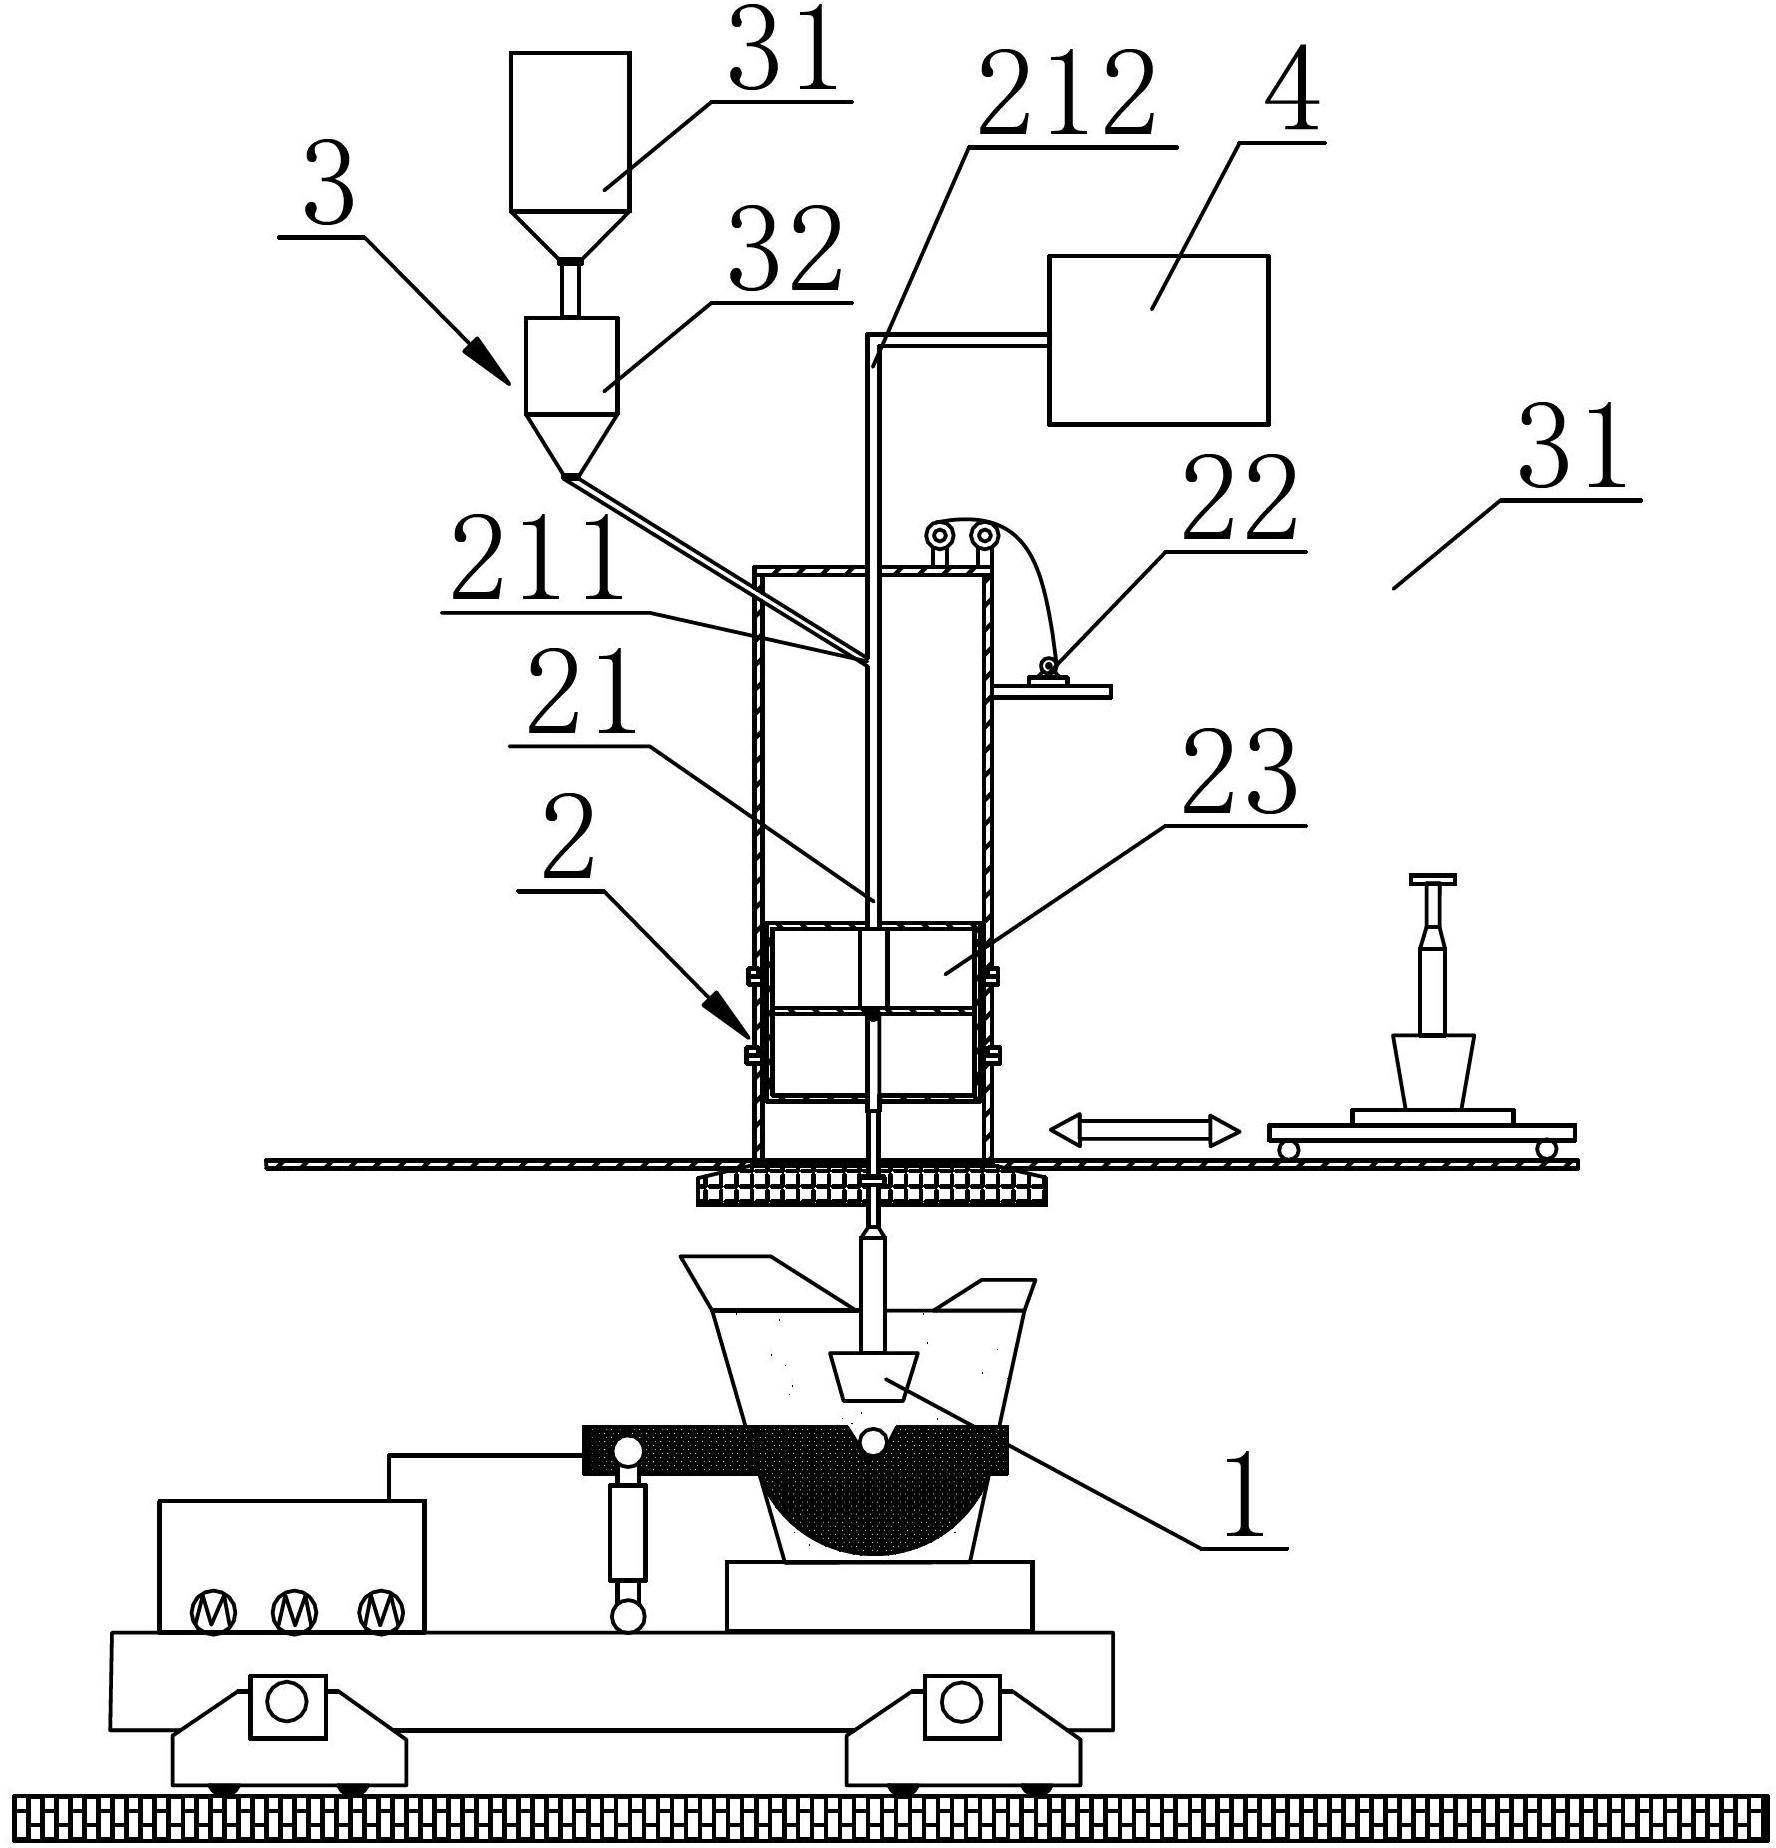 KR (knotted reactor) powder spraying, stirring and desulfurizing device and method